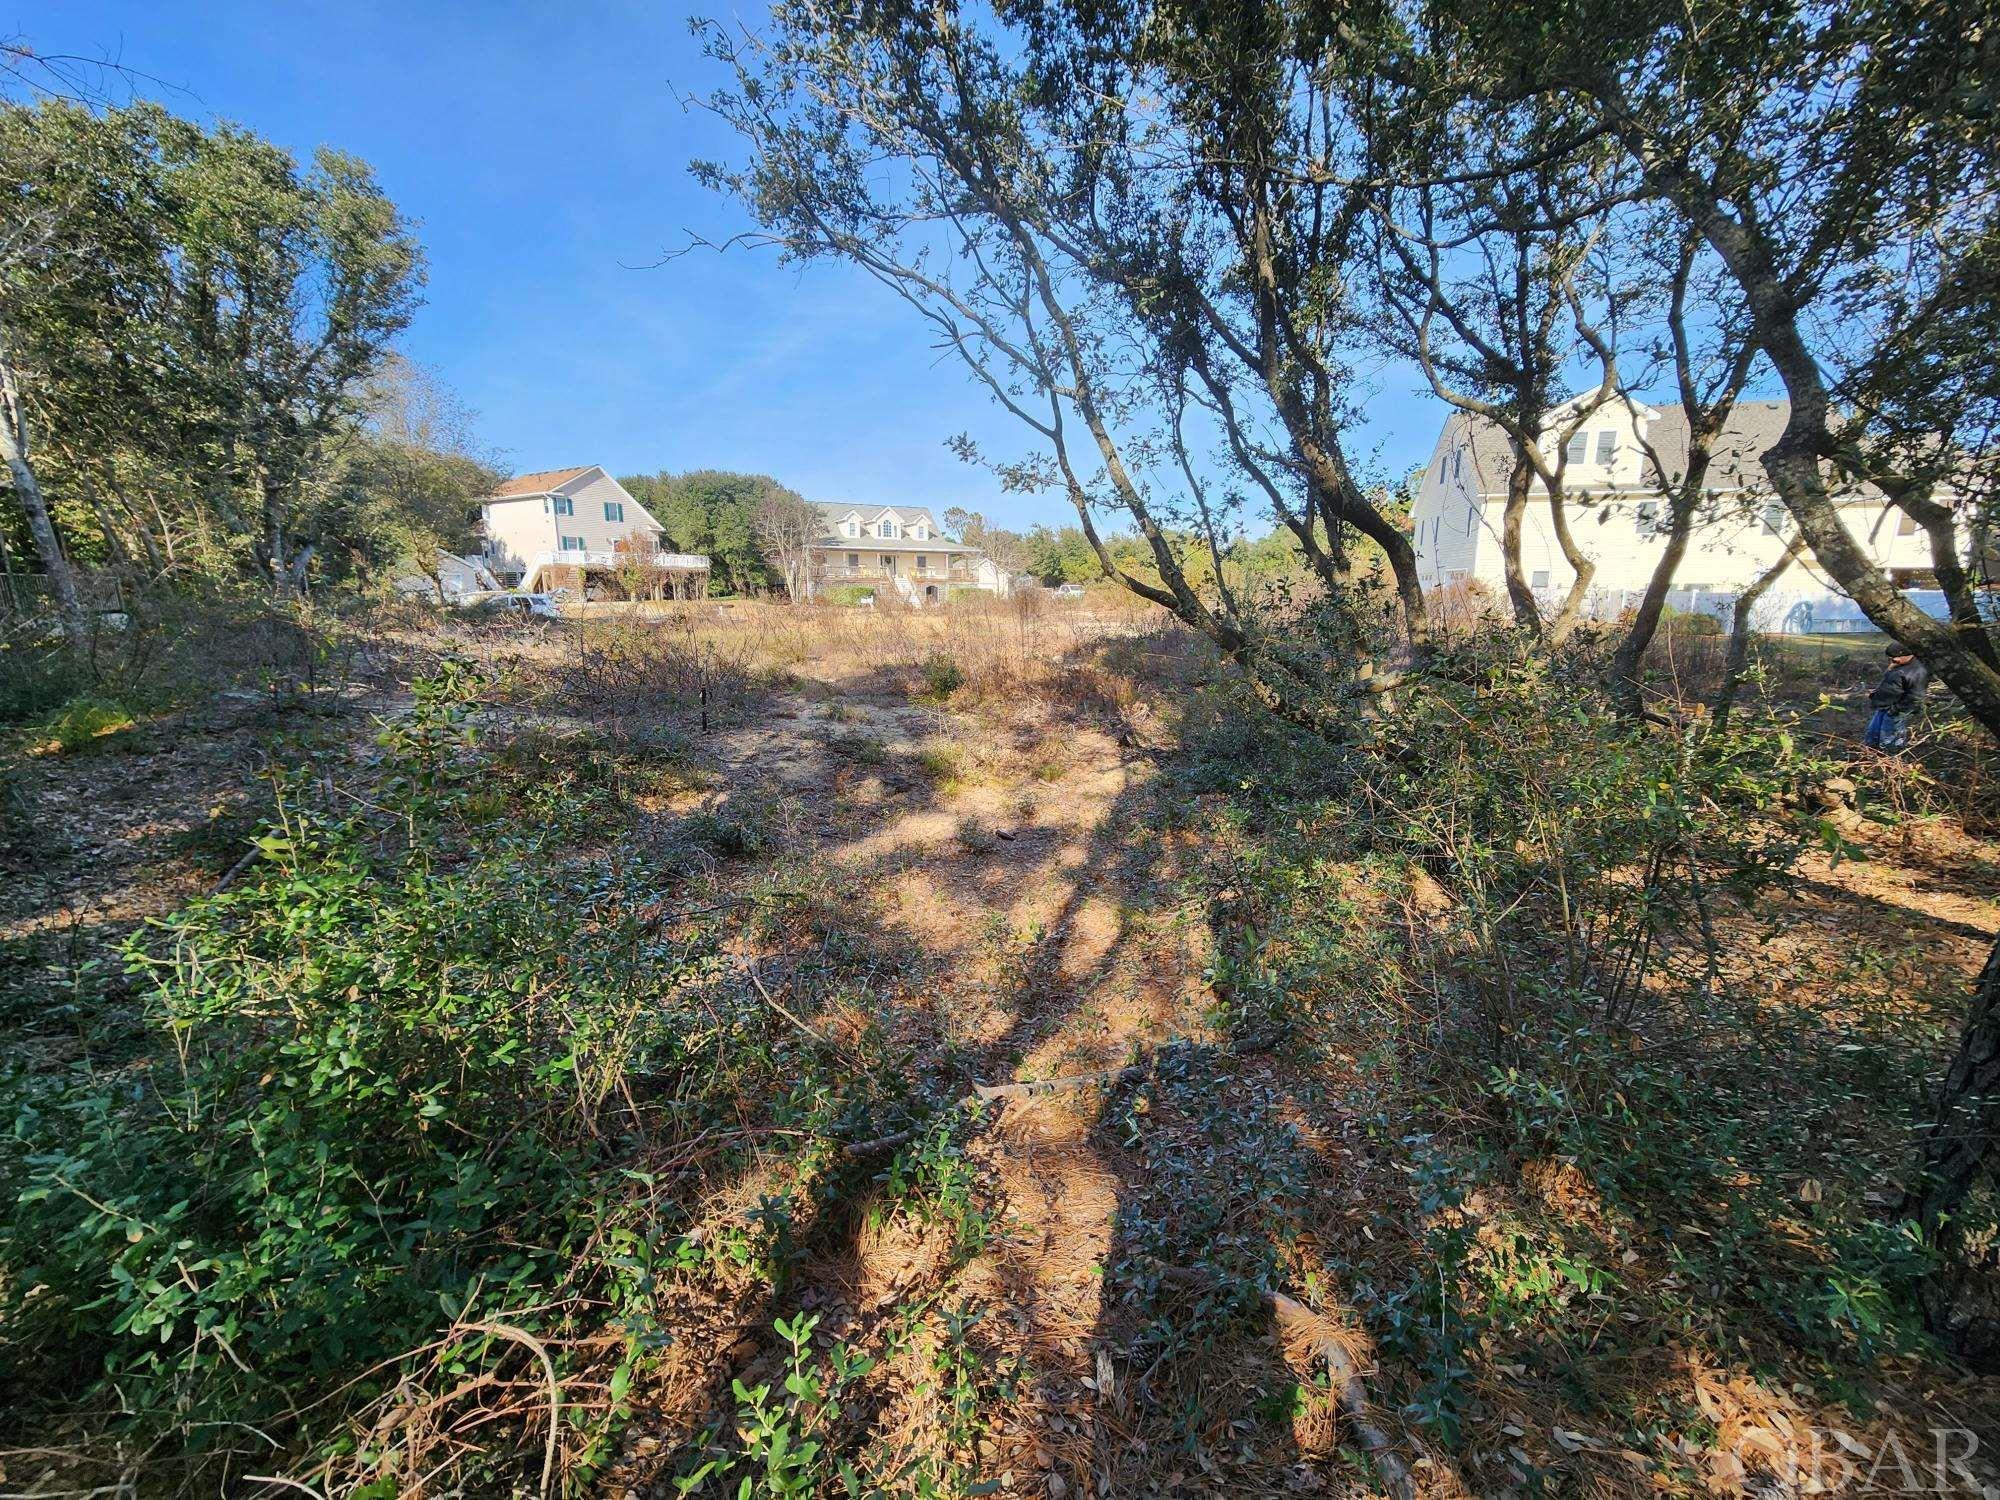 Beautiful Lot in great location!  Not a through street - very little traffic.  Close to many restaurants, attractions and the beach!  The lot has already been cleared and fill brought in.  Custom house plans on file for a spectacular, classic, Nags Head style 3200 Sq. foot house.  Plans included with accepted offer.  Over 100' wide, allows for a great ranch design to be built.  X flood zone = few stairs!  Listing Agent is owner and licensed NC Realtor #225380